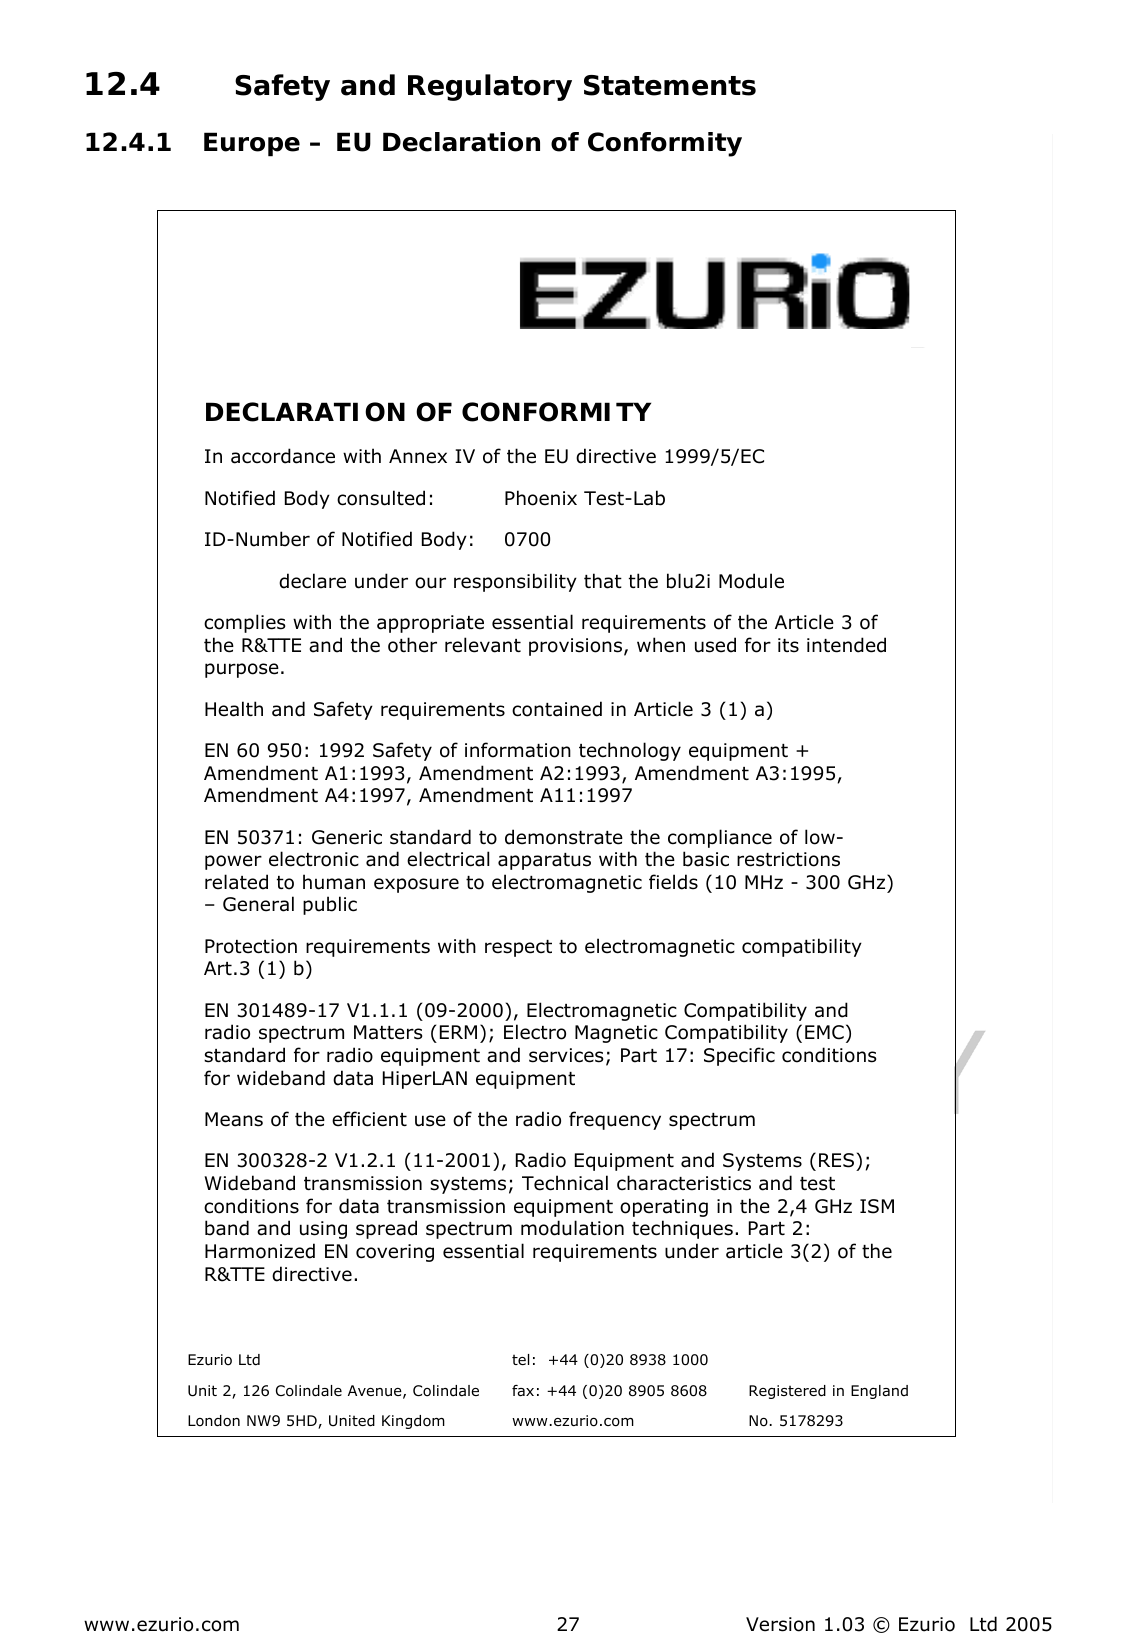  www.ezurio.com  Version 1.03 © Ezurio  Ltd 2005 2712.4 Safety and Regulatory Statements 12.4.1 Europe – EU Declaration of Conformity     DECLARATION OF CONFORMITY  In accordance with Annex IV of the EU directive 1999/5/EC Notified Body consulted:          Phoenix Test-Lab ID-Number of Notified Body:    0700   declare under our responsibility that the blu2i Module complies with the appropriate essential requirements of the Article 3 of the R&amp;TTE and the other relevant provisions, when used for its intended purpose. Health and Safety requirements contained in Article 3 (1) a) EN 60 950: 1992 Safety of information technology equipment + Amendment A1:1993, Amendment A2:1993, Amendment A3:1995, Amendment A4:1997, Amendment A11:1997 EN 50371: Generic standard to demonstrate the compliance of low-power electronic and electrical apparatus with the basic restrictions related to human exposure to electromagnetic fields (10 MHz - 300 GHz) – General public  Protection requirements with respect to electromagnetic compatibility Art.3 (1) b) EN 301489-17 V1.1.1 (09-2000), Electromagnetic Compatibility and radio spectrum Matters (ERM); Electro Magnetic Compatibility (EMC) standard for radio equipment and services; Part 17: Specific conditions for wideband data HiperLAN equipment  Means of the efficient use of the radio frequency spectrum EN 300328-2 V1.2.1 (11-2001), Radio Equipment and Systems (RES); Wideband transmission systems; Technical characteristics and test conditions for data transmission equipment operating in the 2,4 GHz ISM band and using spread spectrum modulation techniques. Part 2: Harmonized EN covering essential requirements under article 3(2) of the R&amp;TTE directive.    Ezurio Ltd  tel:  +44 (0)20 8938 1000    Unit 2, 126 Colindale Avenue, Colindale  fax: +44 (0)20 8905 8608  Registered in England   London NW9 5HD, United Kingdom  www.ezurio.com  No. 5178293   